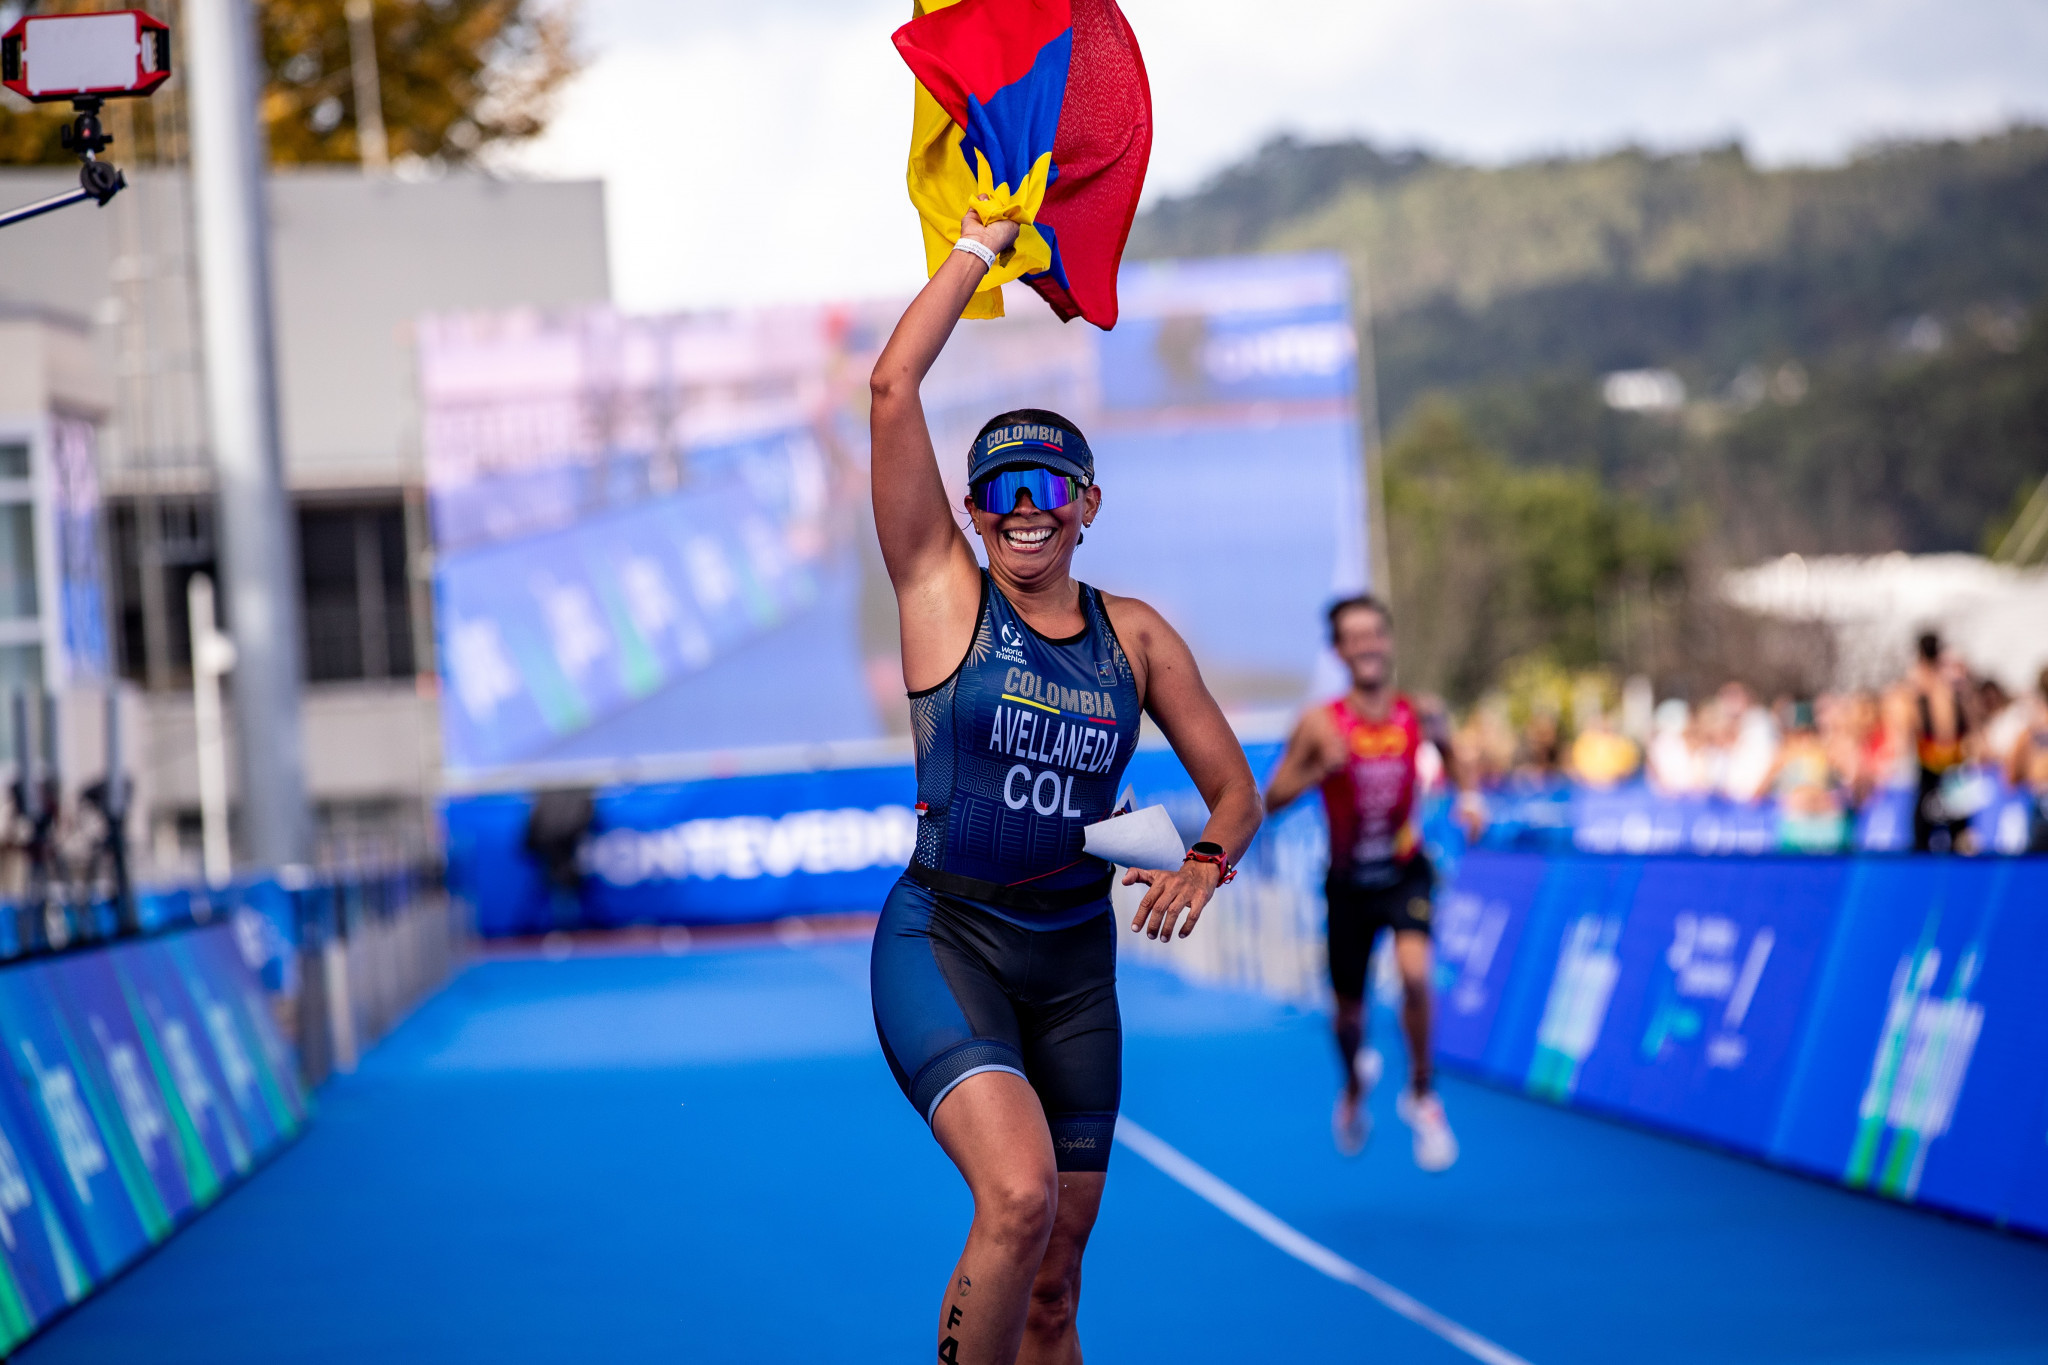 Athletes from 57 countries including Colombia are in Pontevedra for the World Triathlon Championship Finals ©World Triathlon